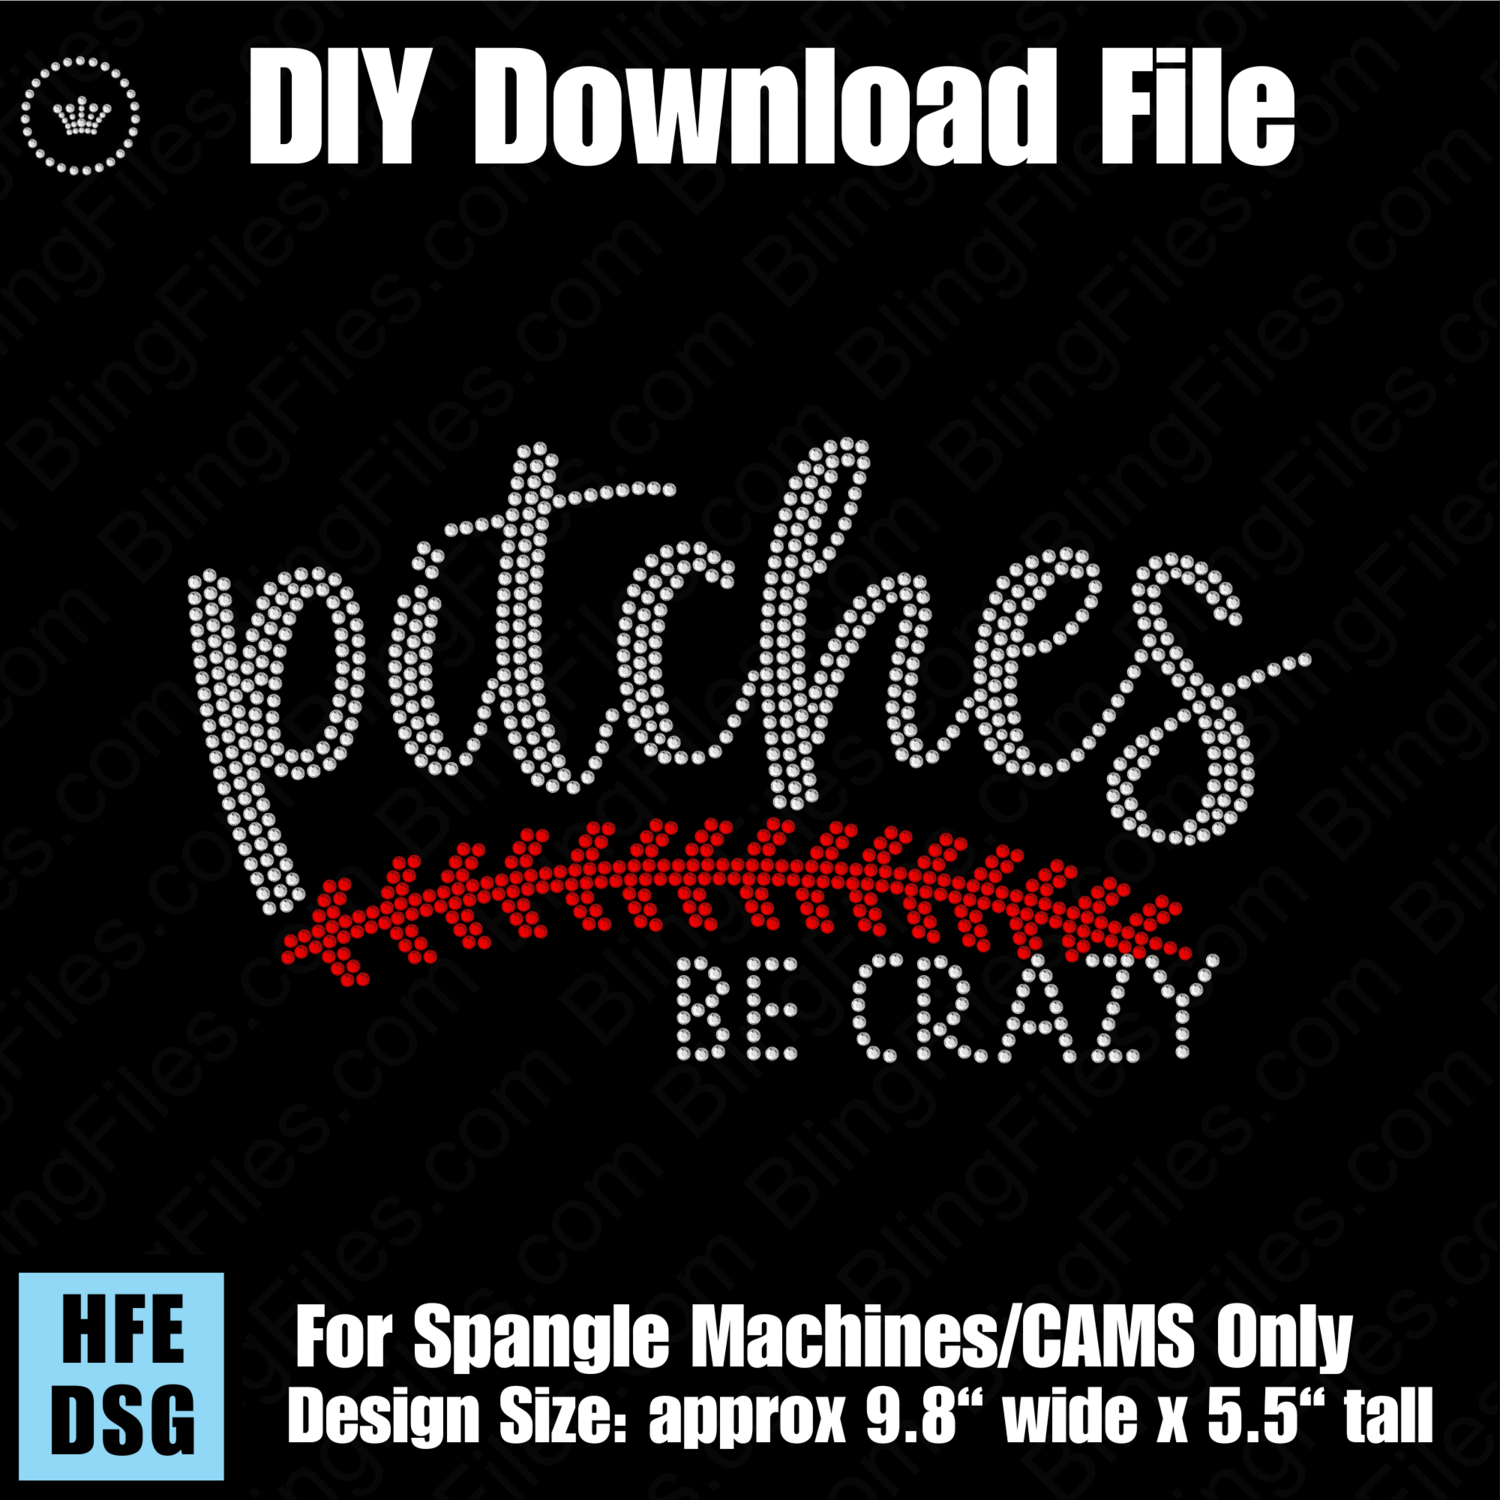 Pitches Be Crazy, Pitches Please Baseball BUNDLE DSG Download File - CAMS/ProSpangle